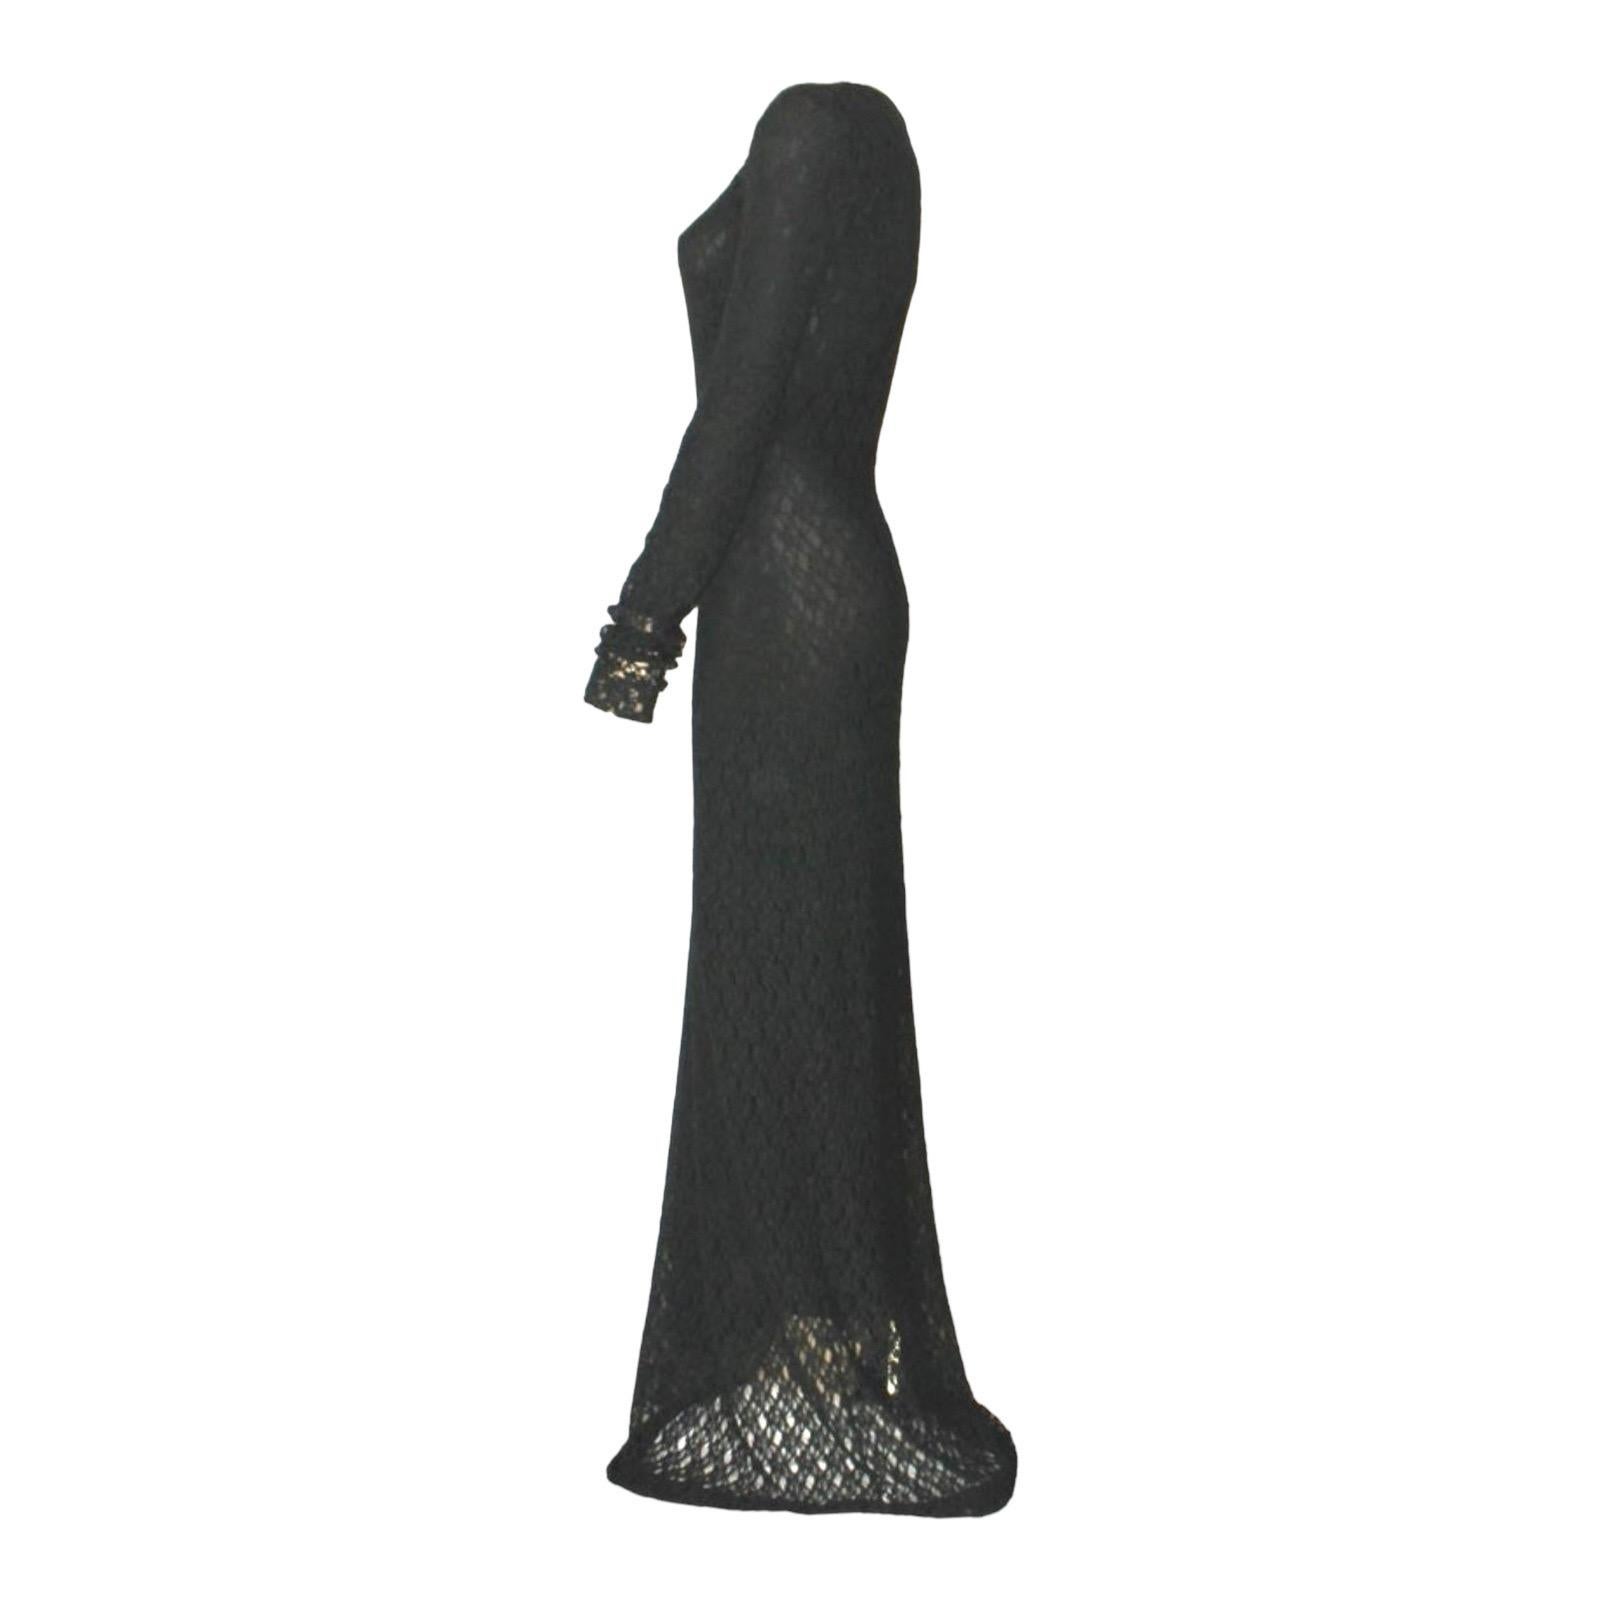 A stunning evening gown by Dolce & Gabbana
This dress dates back to the early 1990s
This wonderful dress is made of a soft 3D structure crochet knit
The dress is fully lined
(Lining could be removed if needed for a more revealing look and worn with